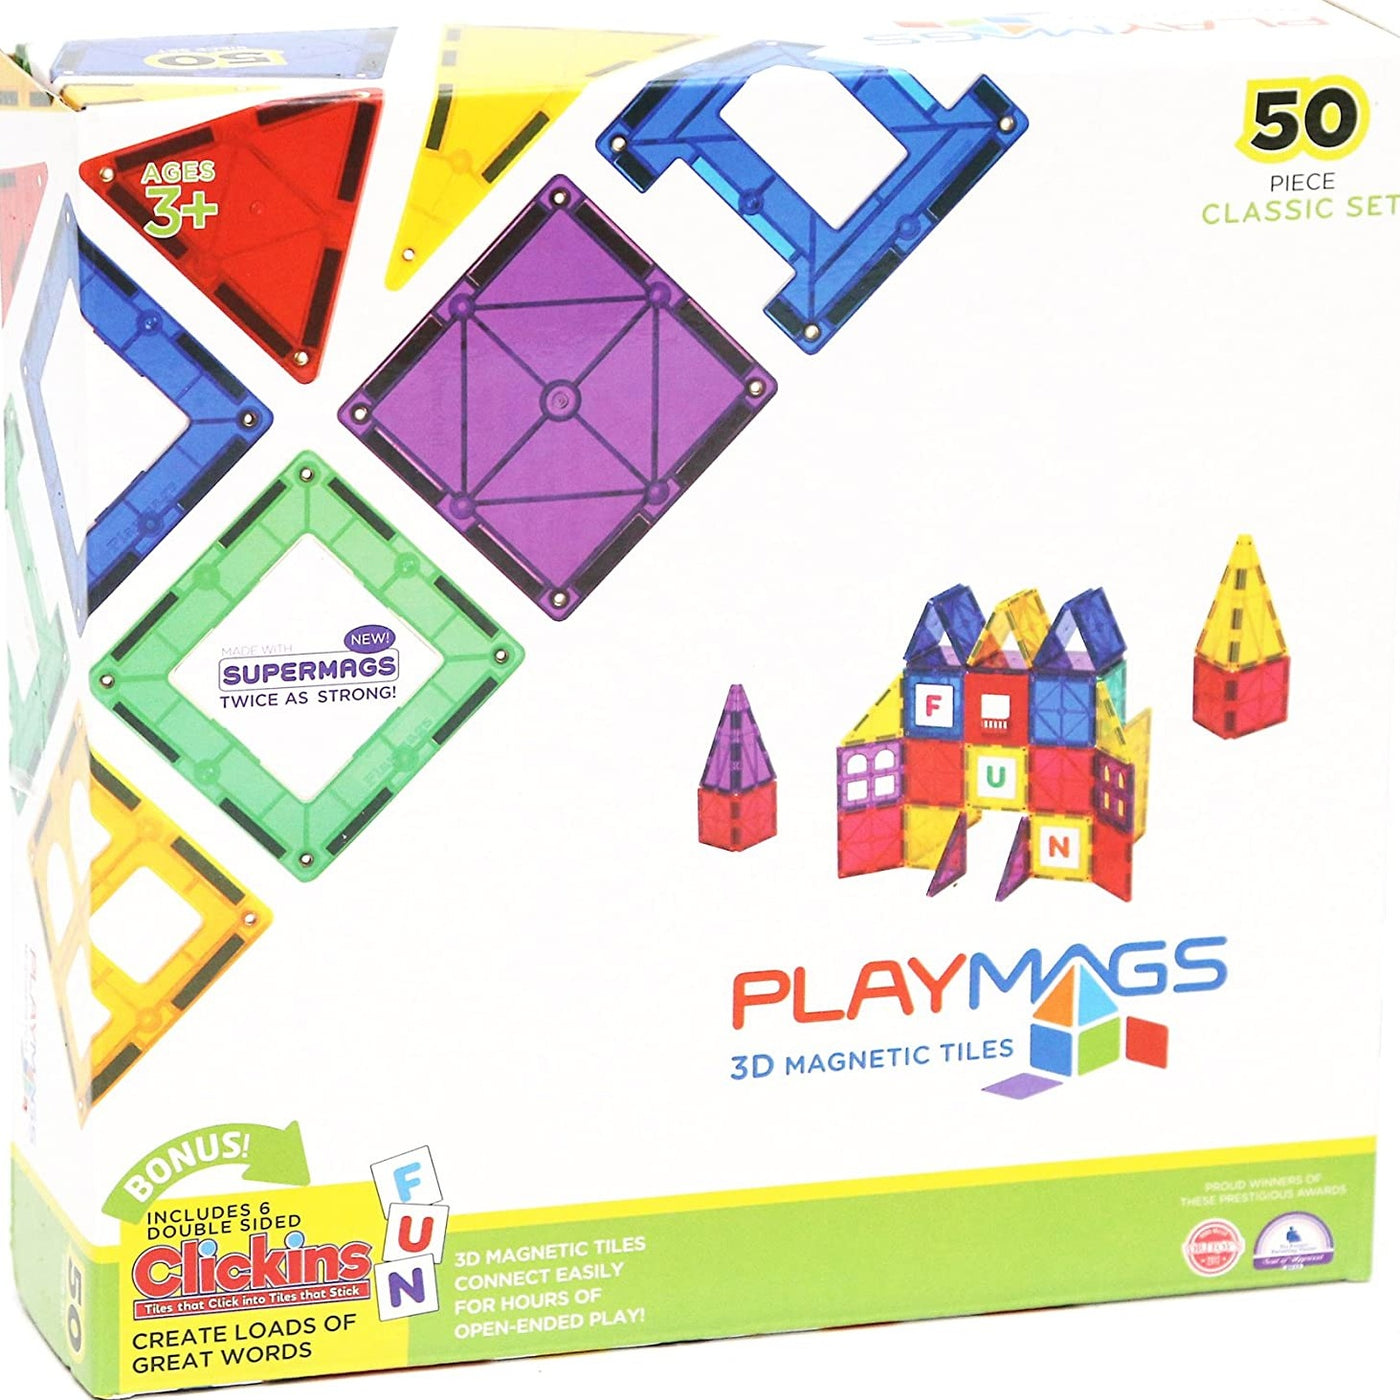 Playmags - 50 stk classic set